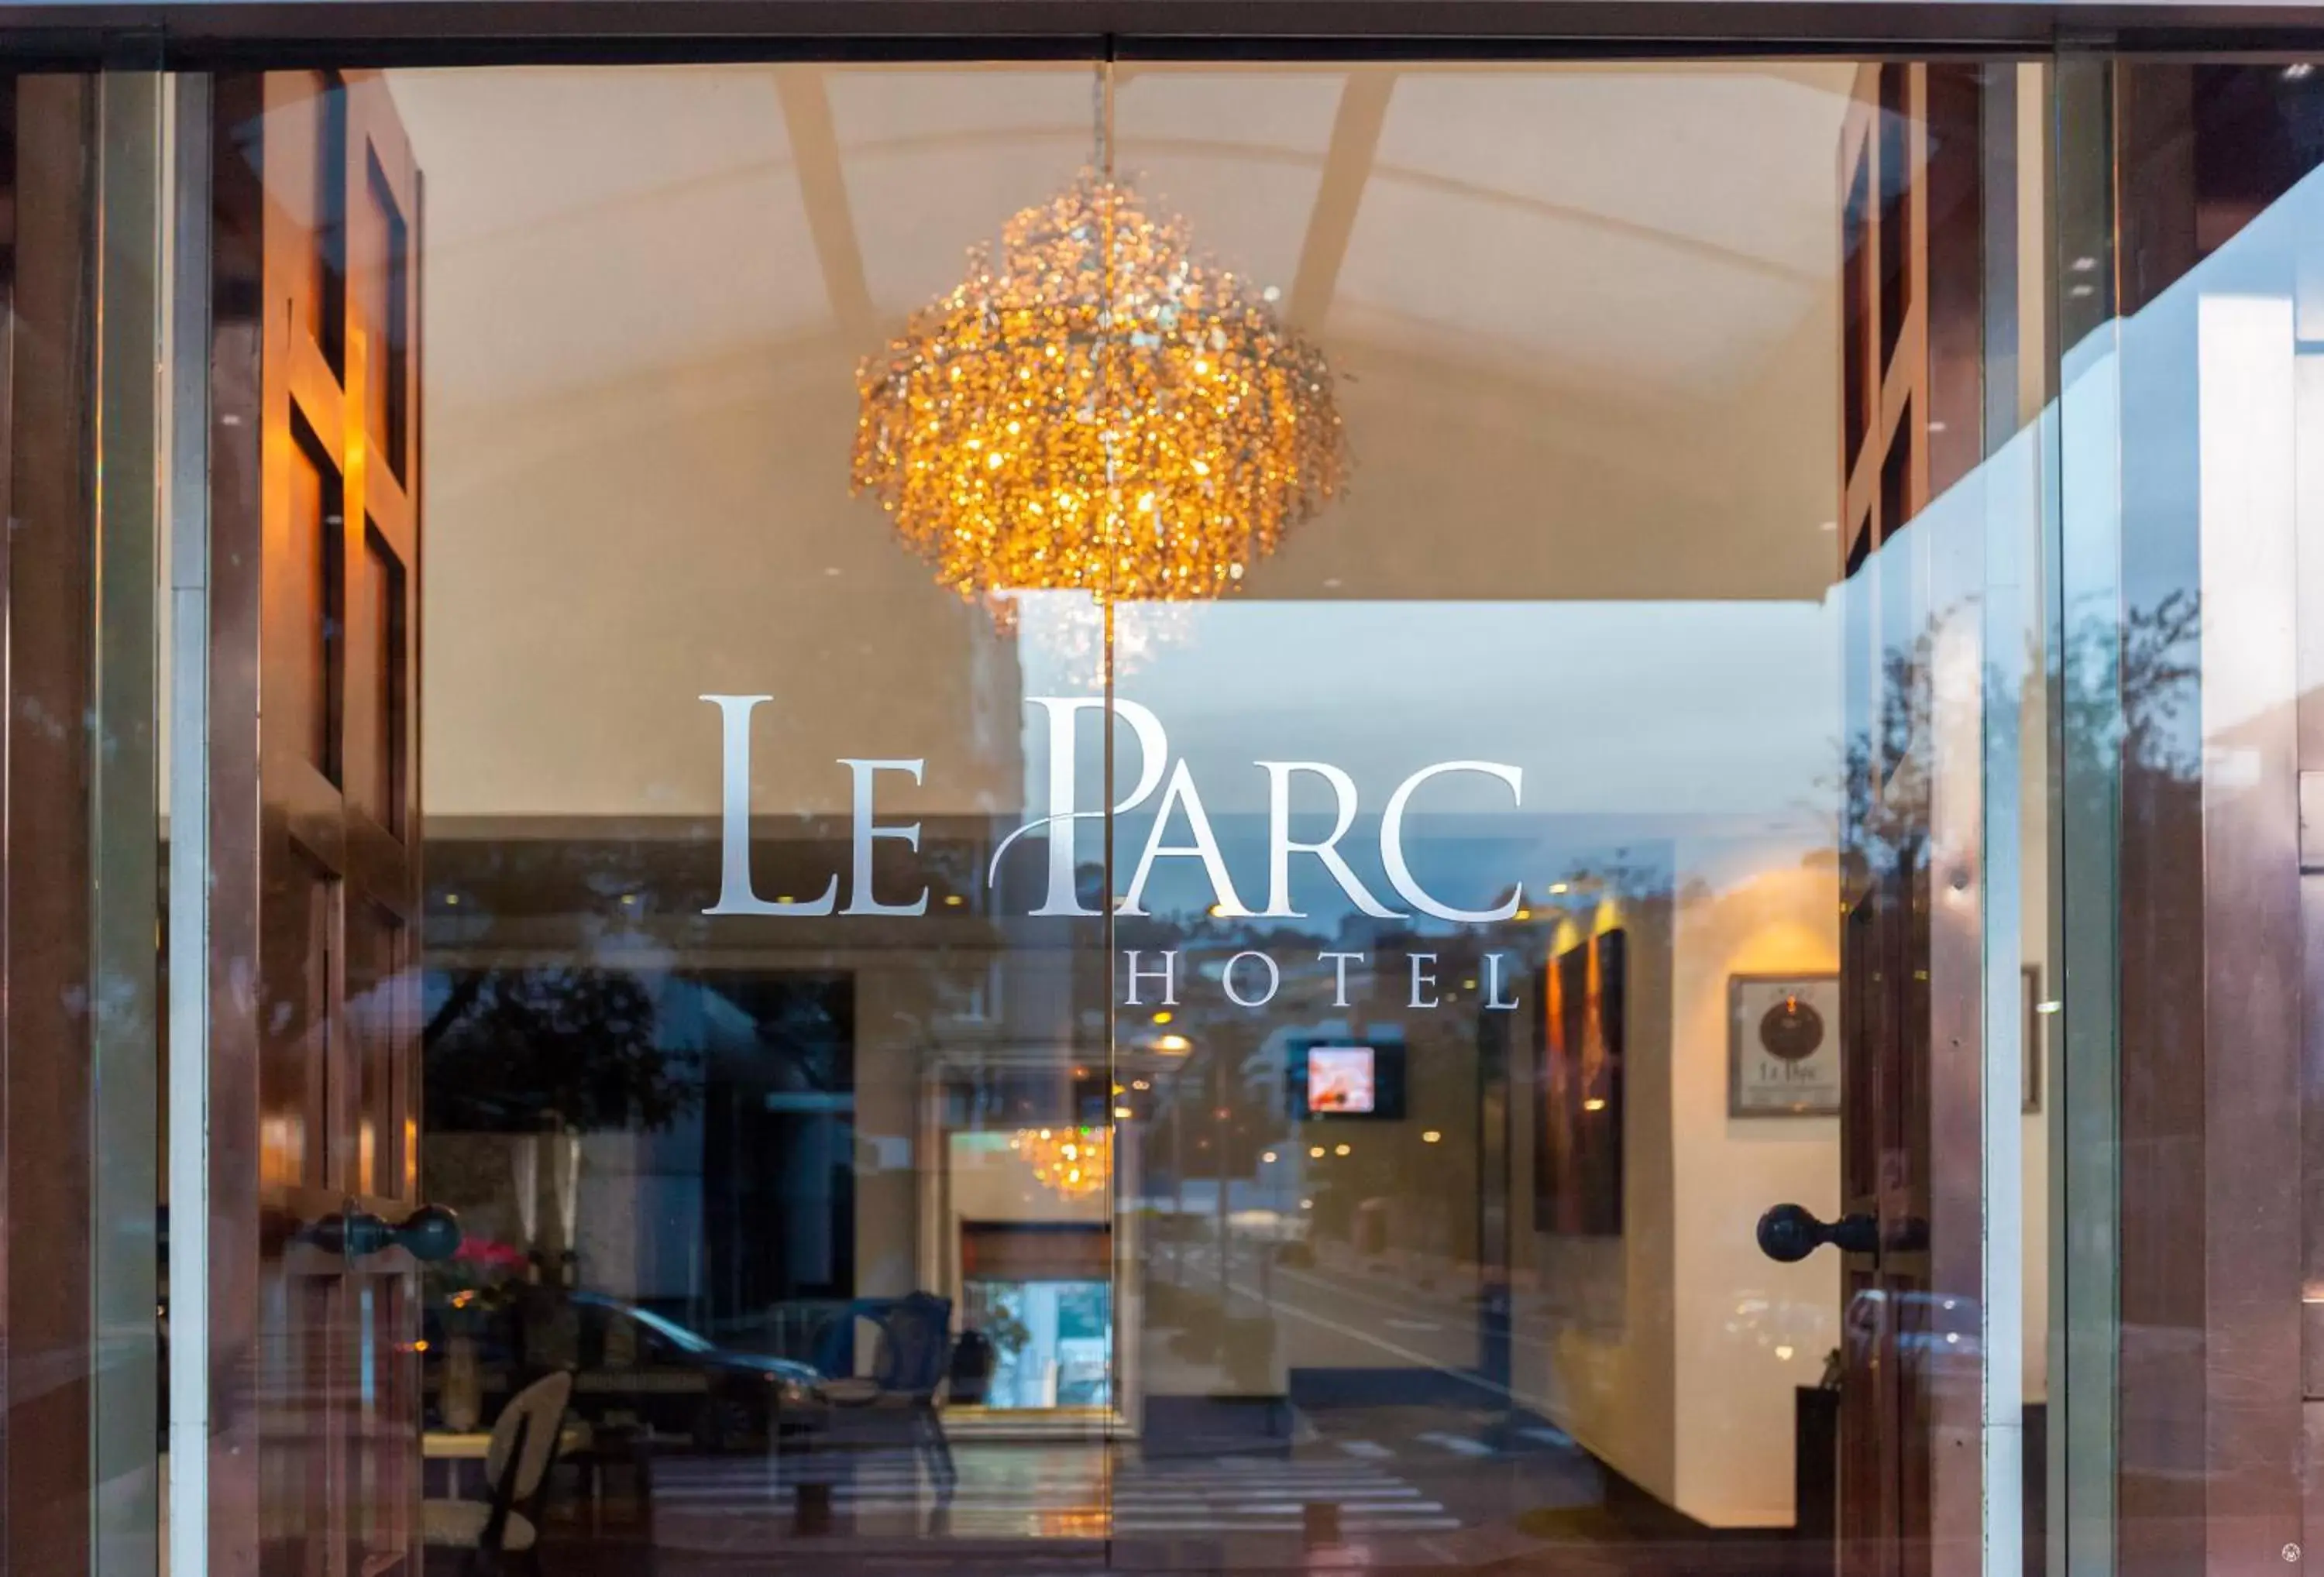 Facade/entrance in Le Parc Hotel, Beyond Stars